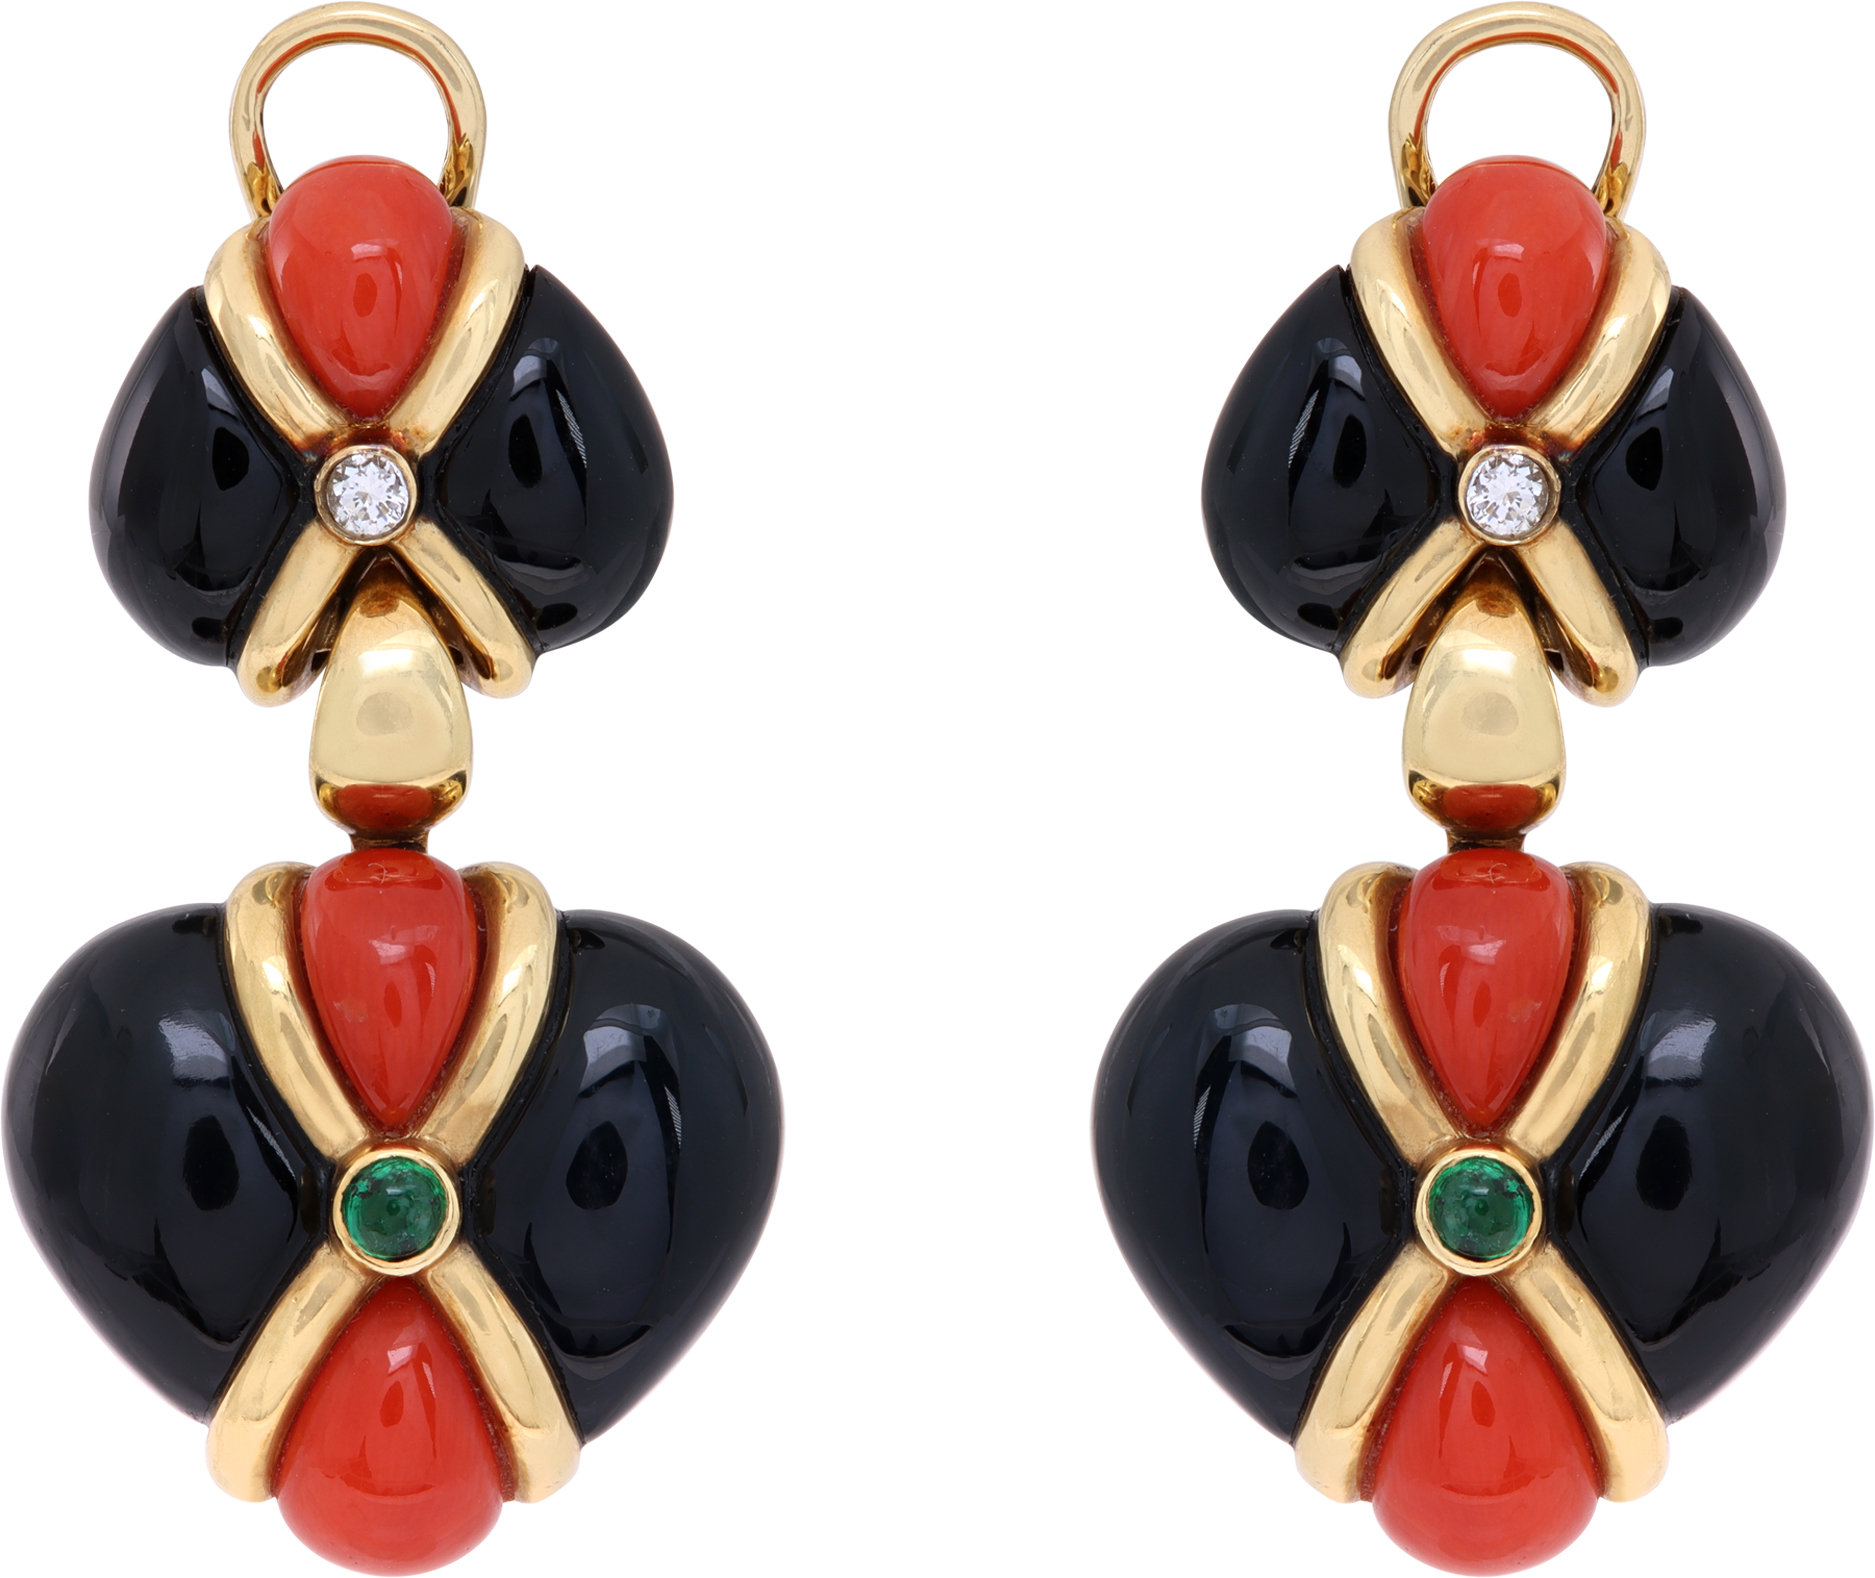 Onyx & Coral dangling earrings in 18k yellow gold with cabochon emeralds and diamonds.